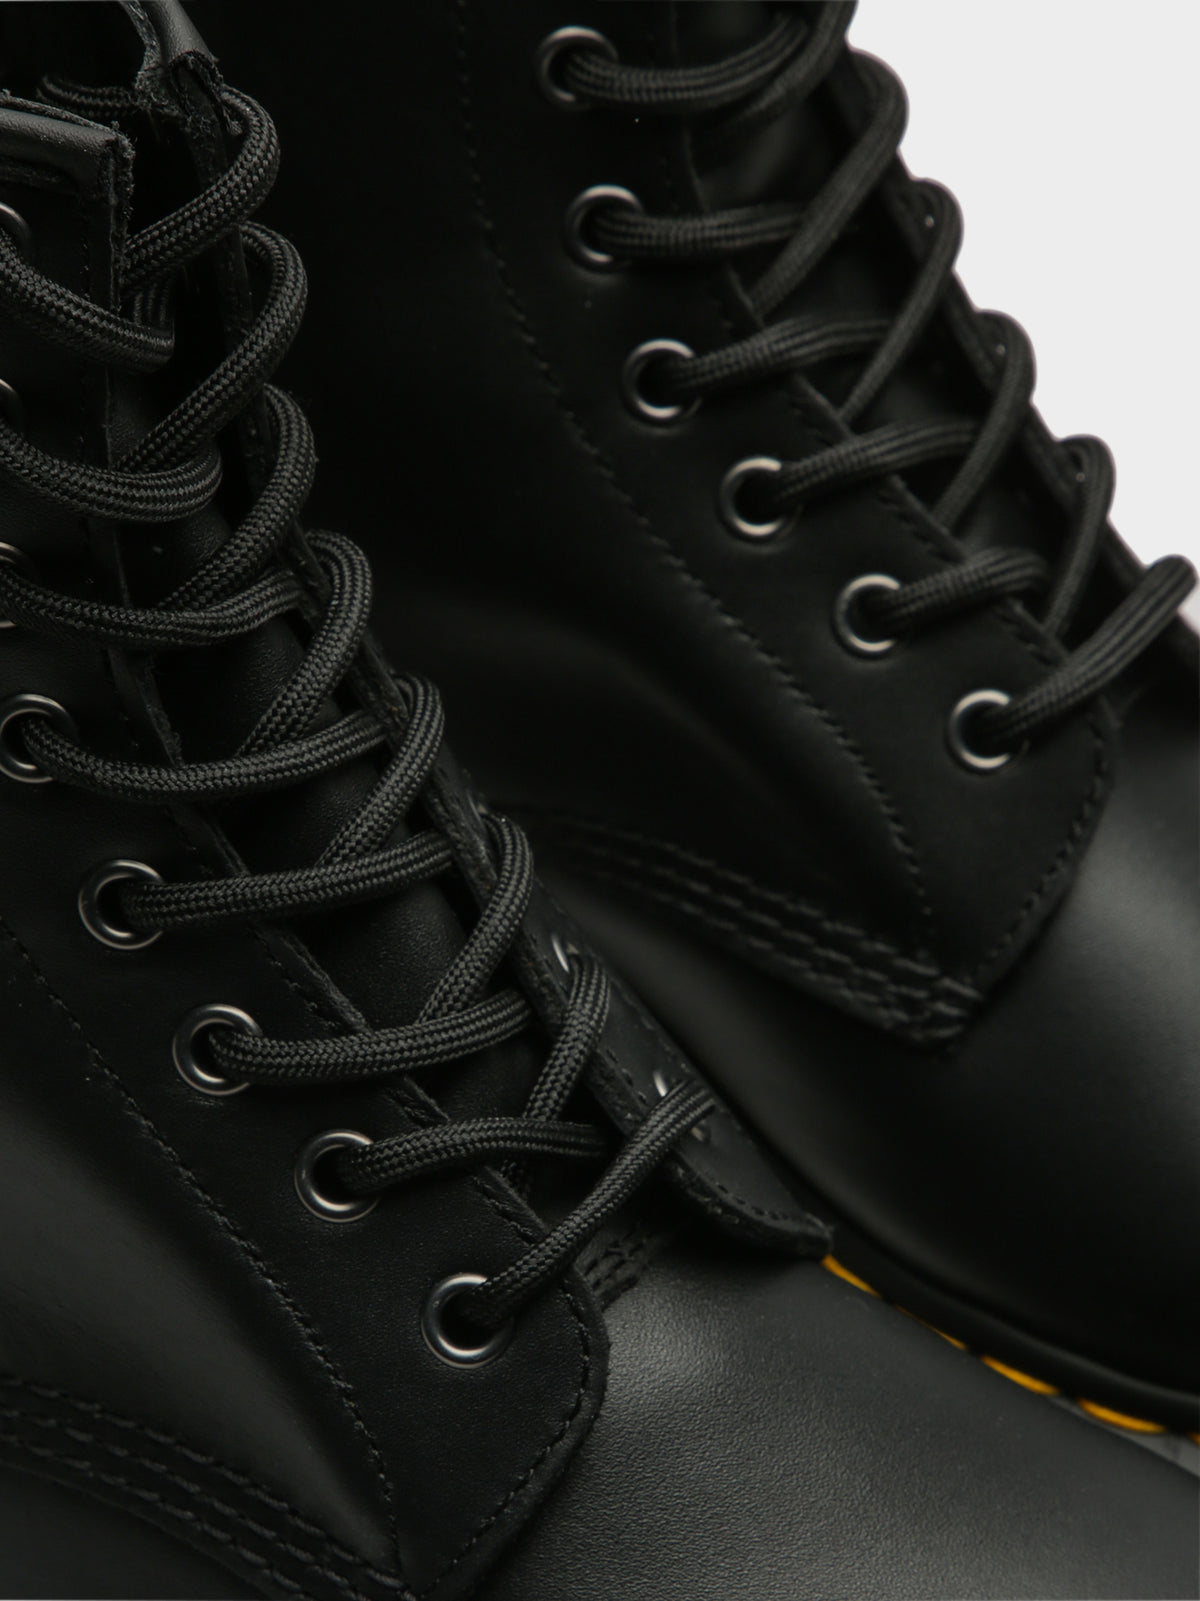 Unisex 1460 Lace-Up Boots in Nappa Black Leather